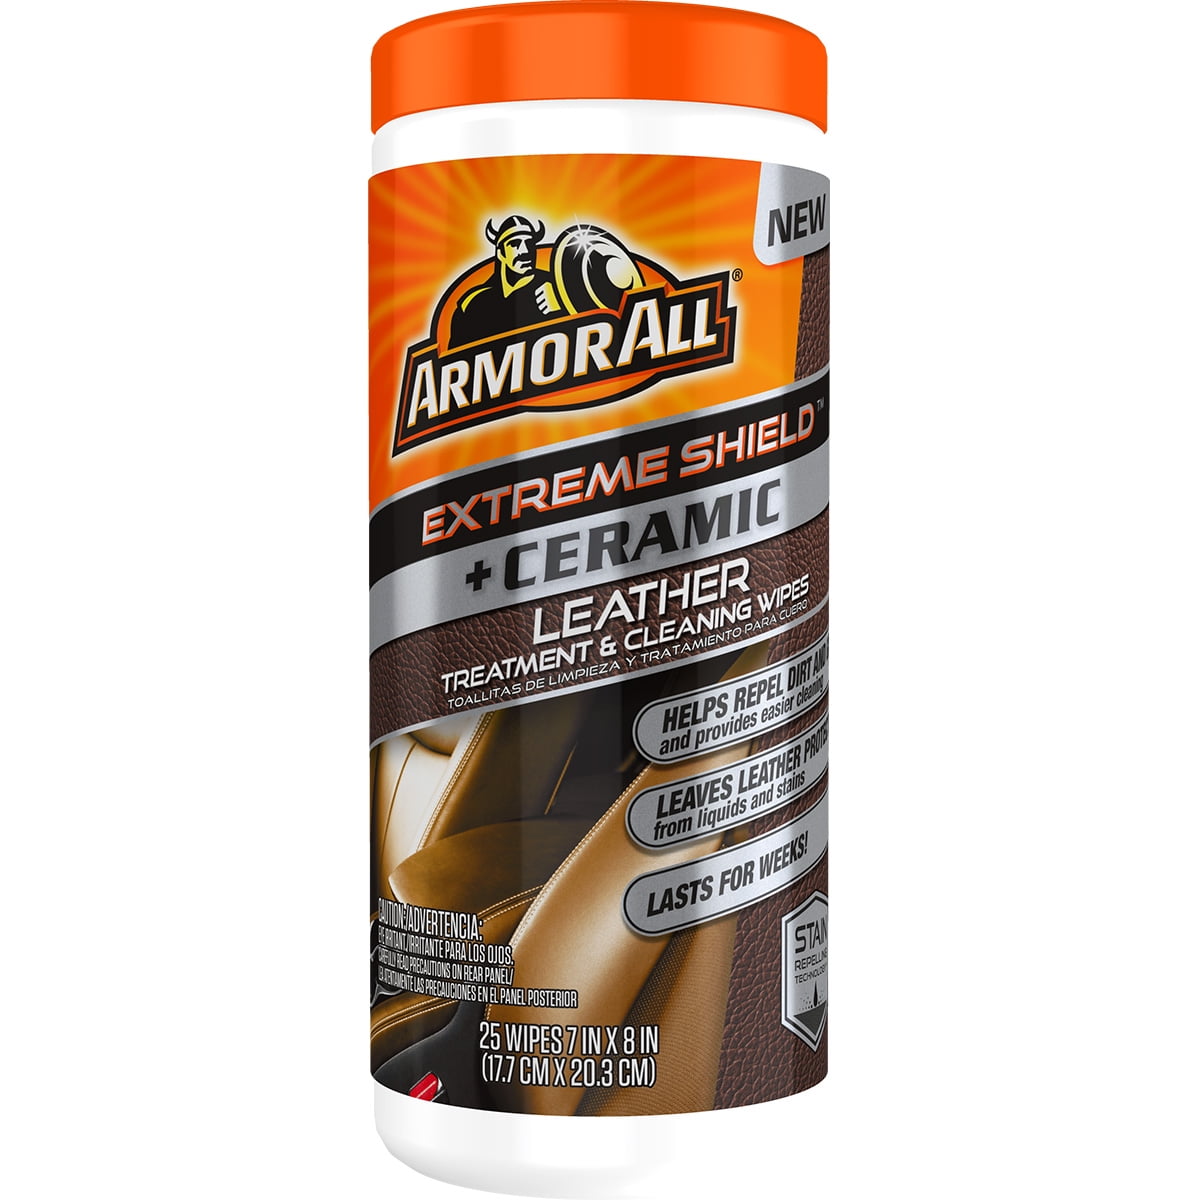 Armor All Extreme Shield + Ceramic Leather Treatment & Cleaner Wipes